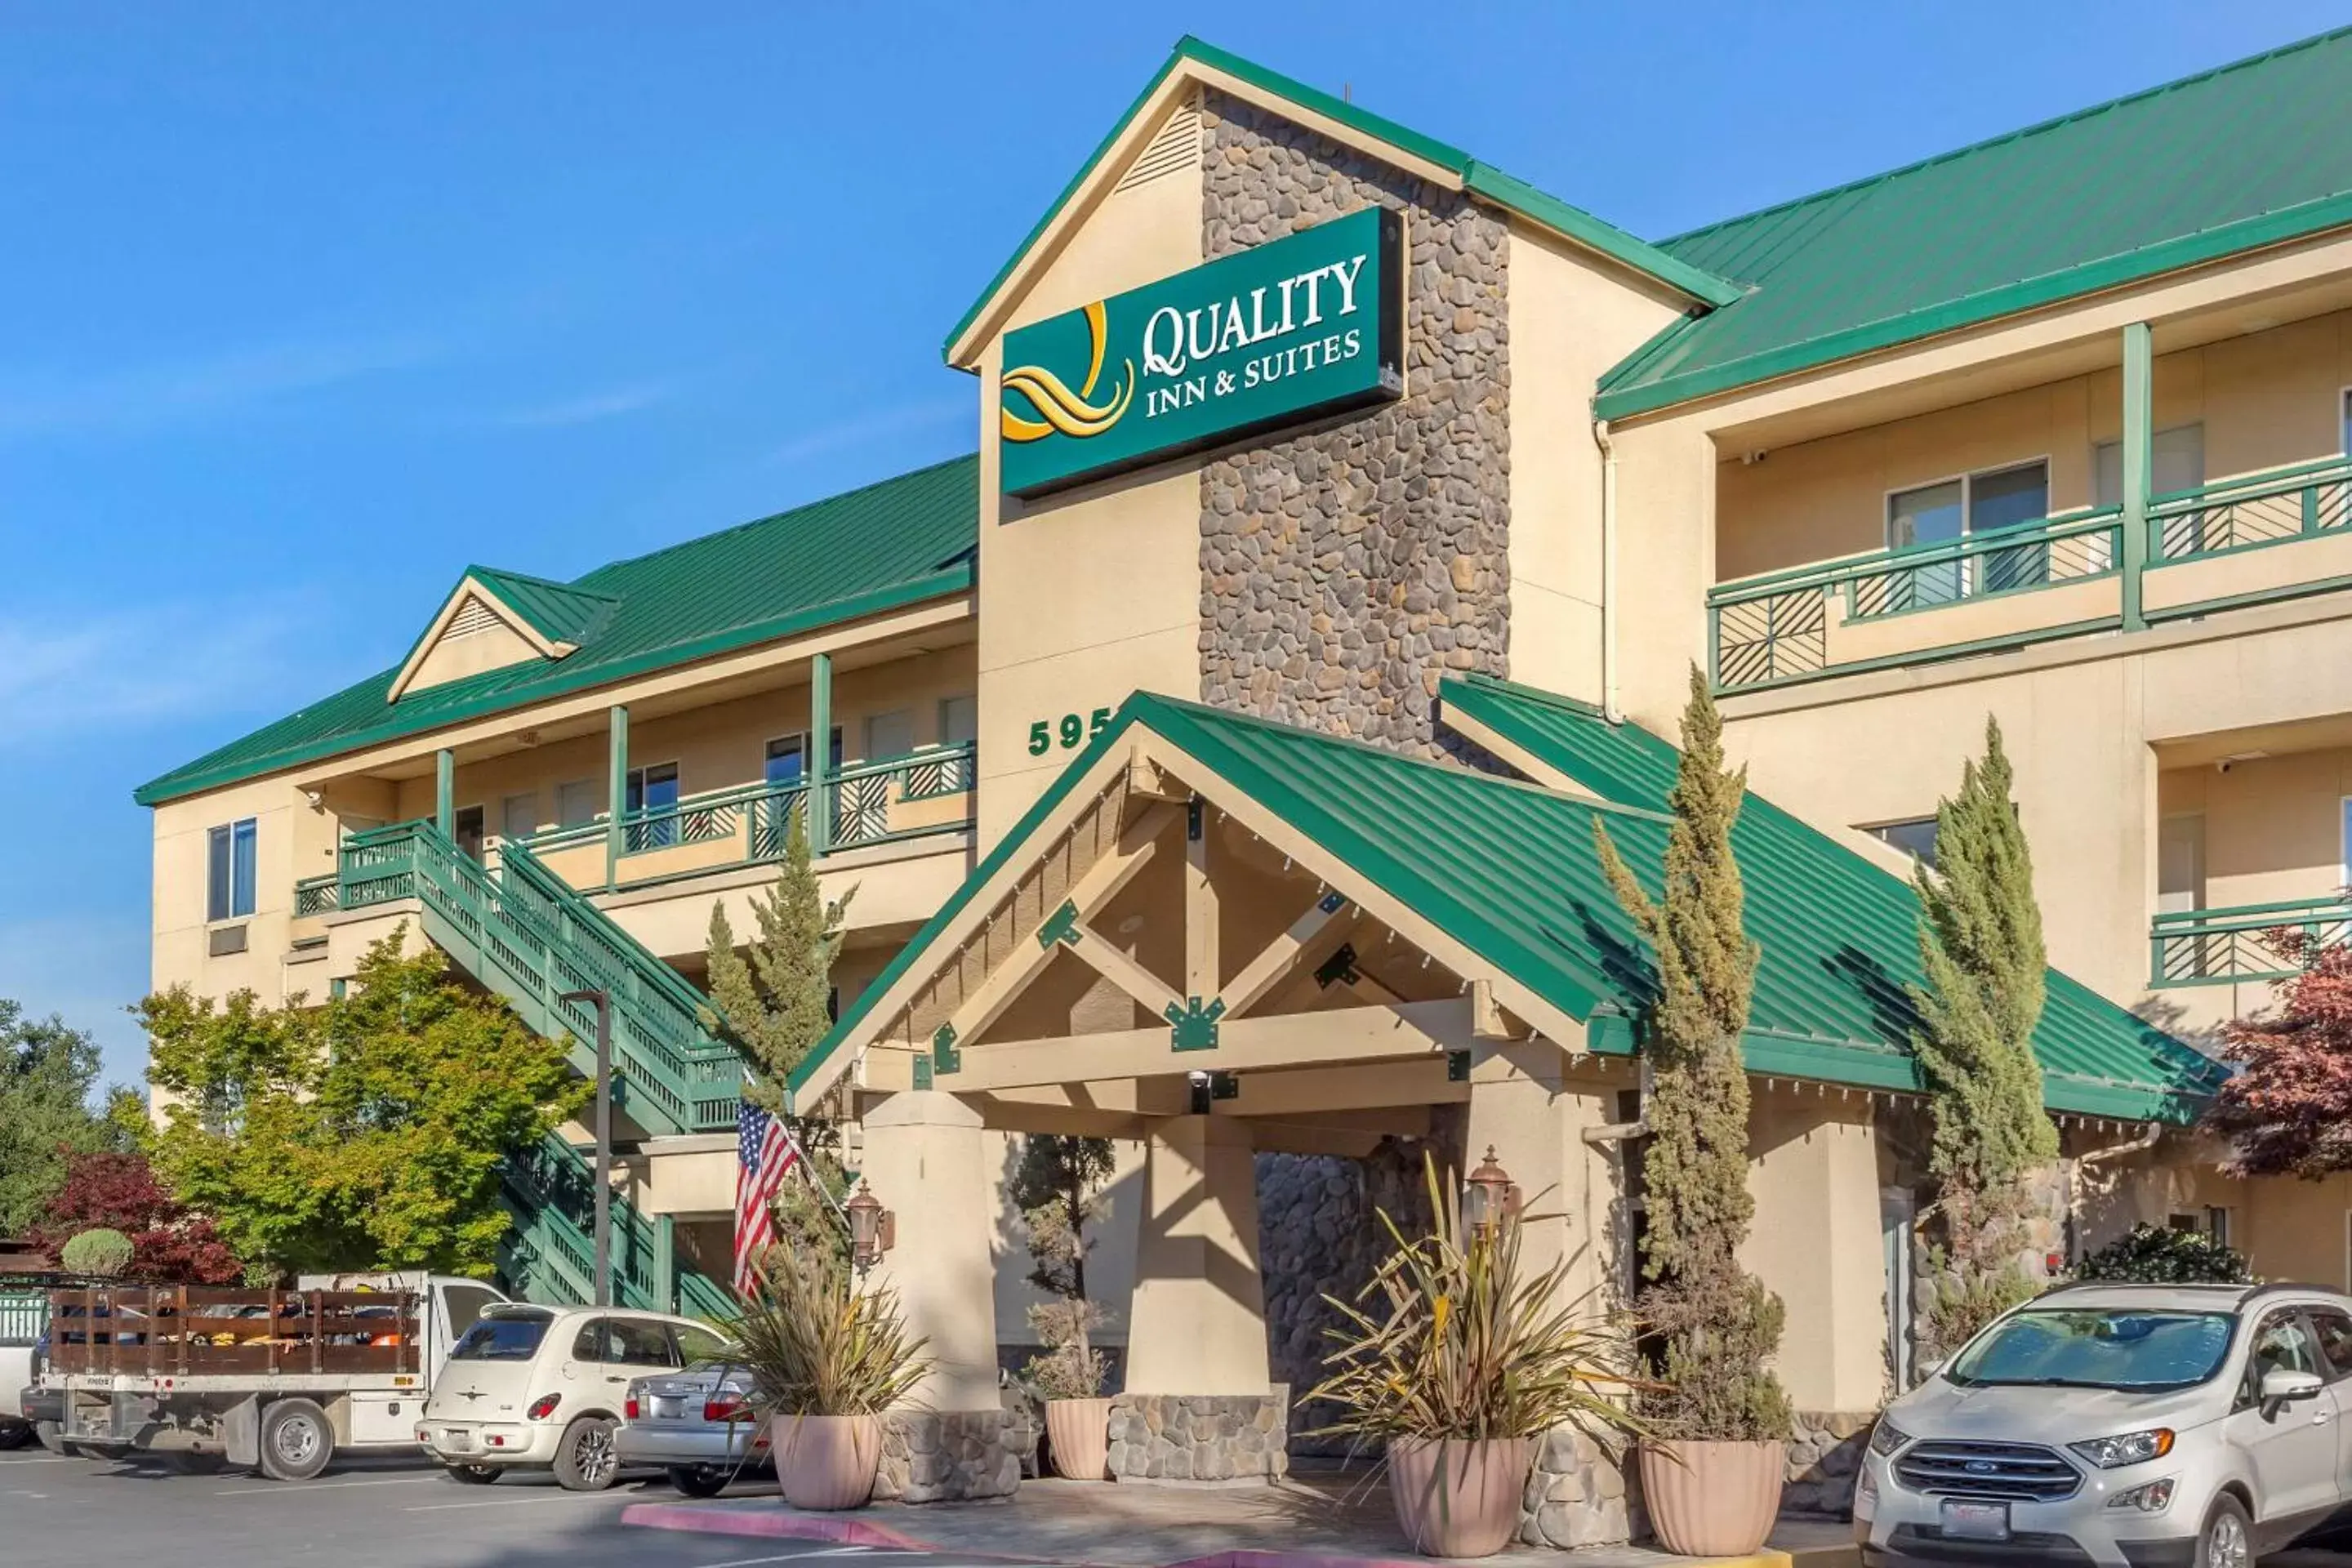 Property Building in Quality Inn & Suites Livermore